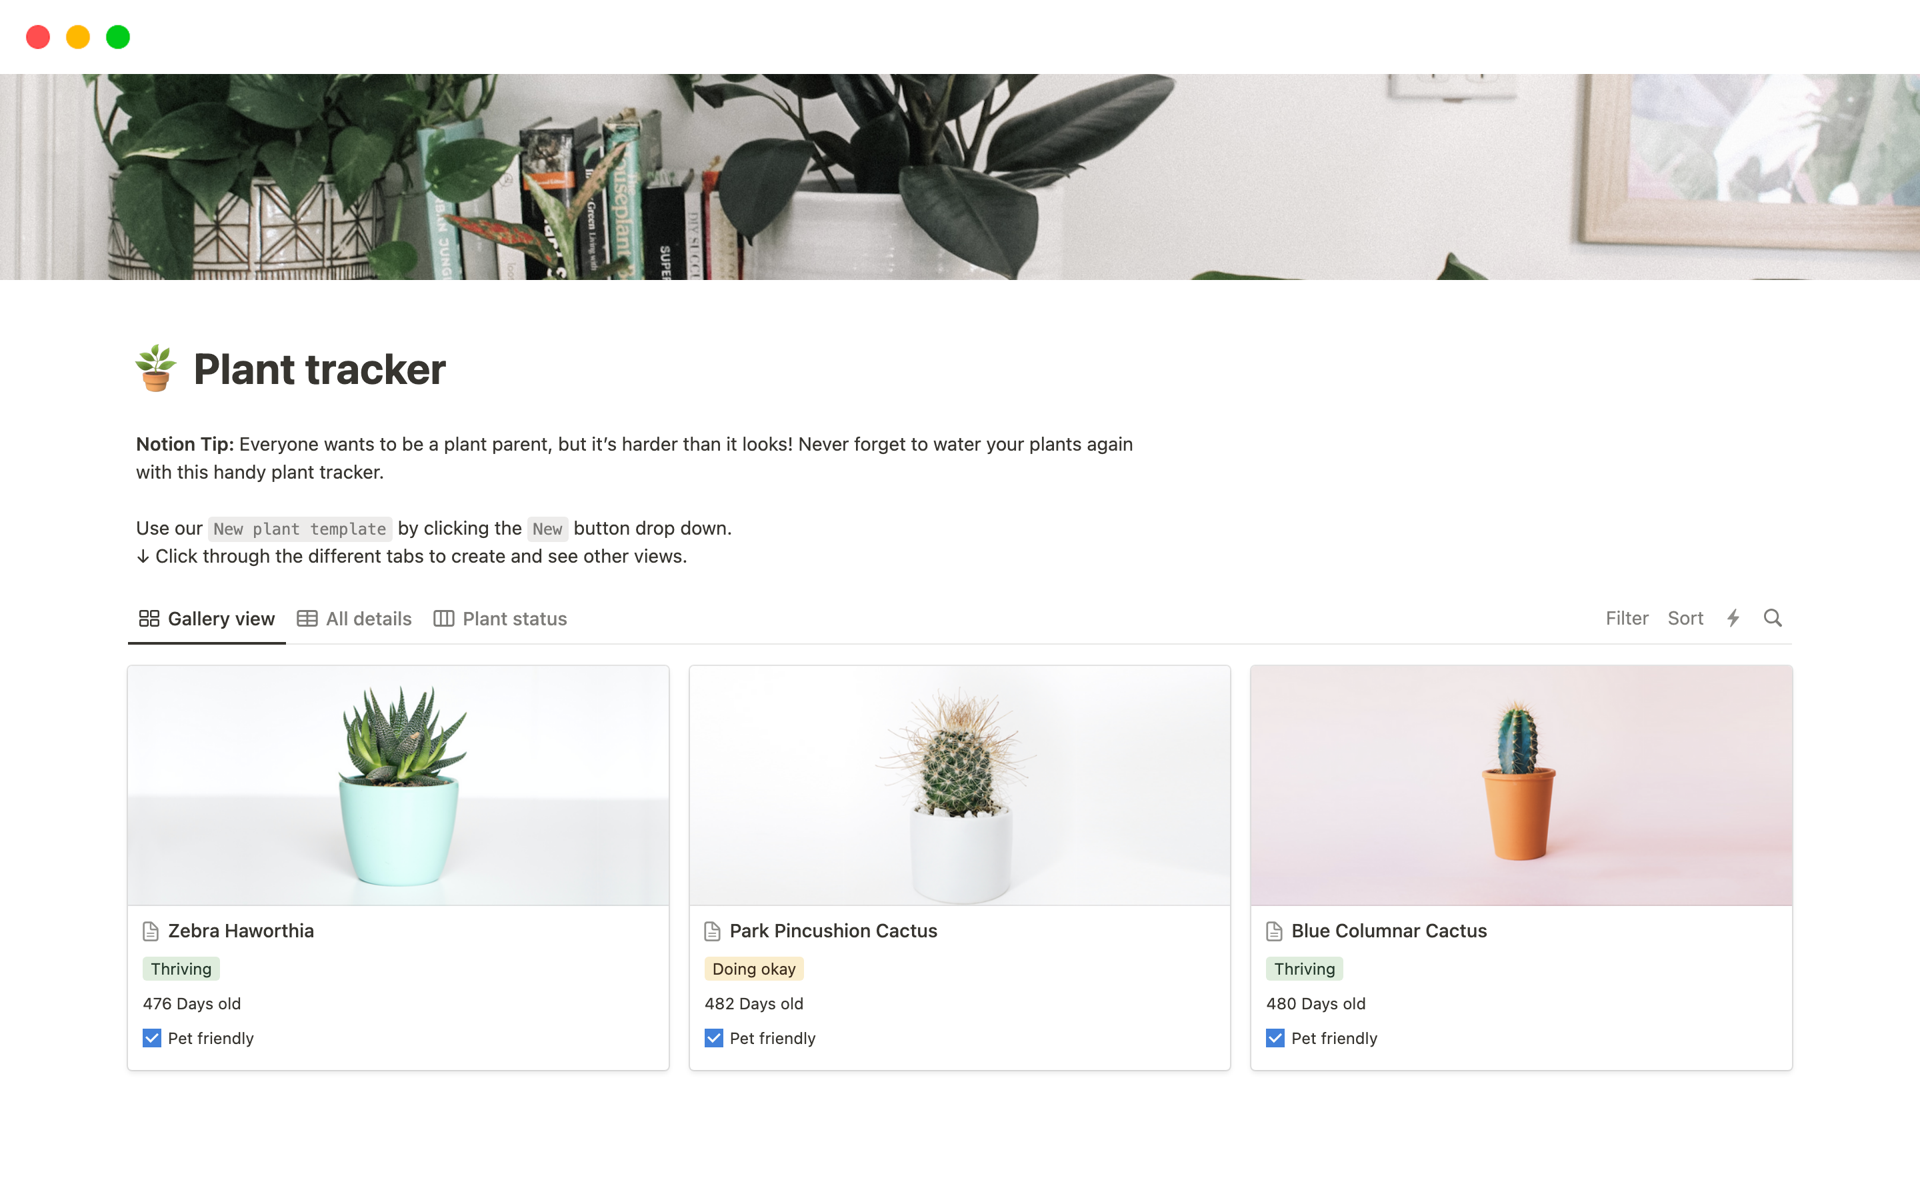 A plant tracker Notion template serves as a tool for plant enthusiasts